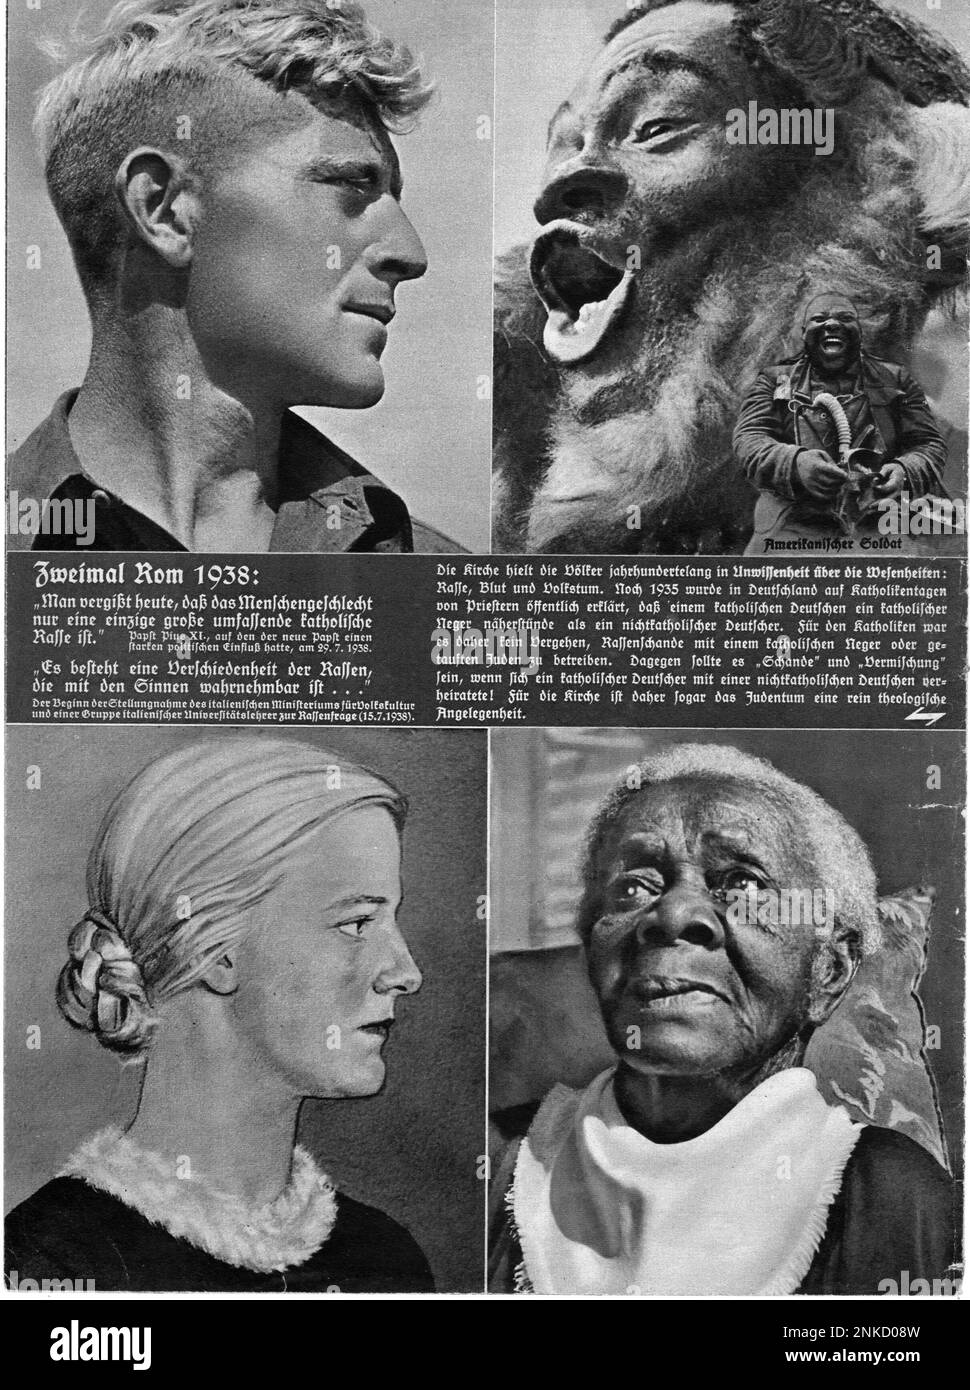 A Nazi propaganda poster showing the difference between Aryan Germans and non-Aryan black people. Stock Photo